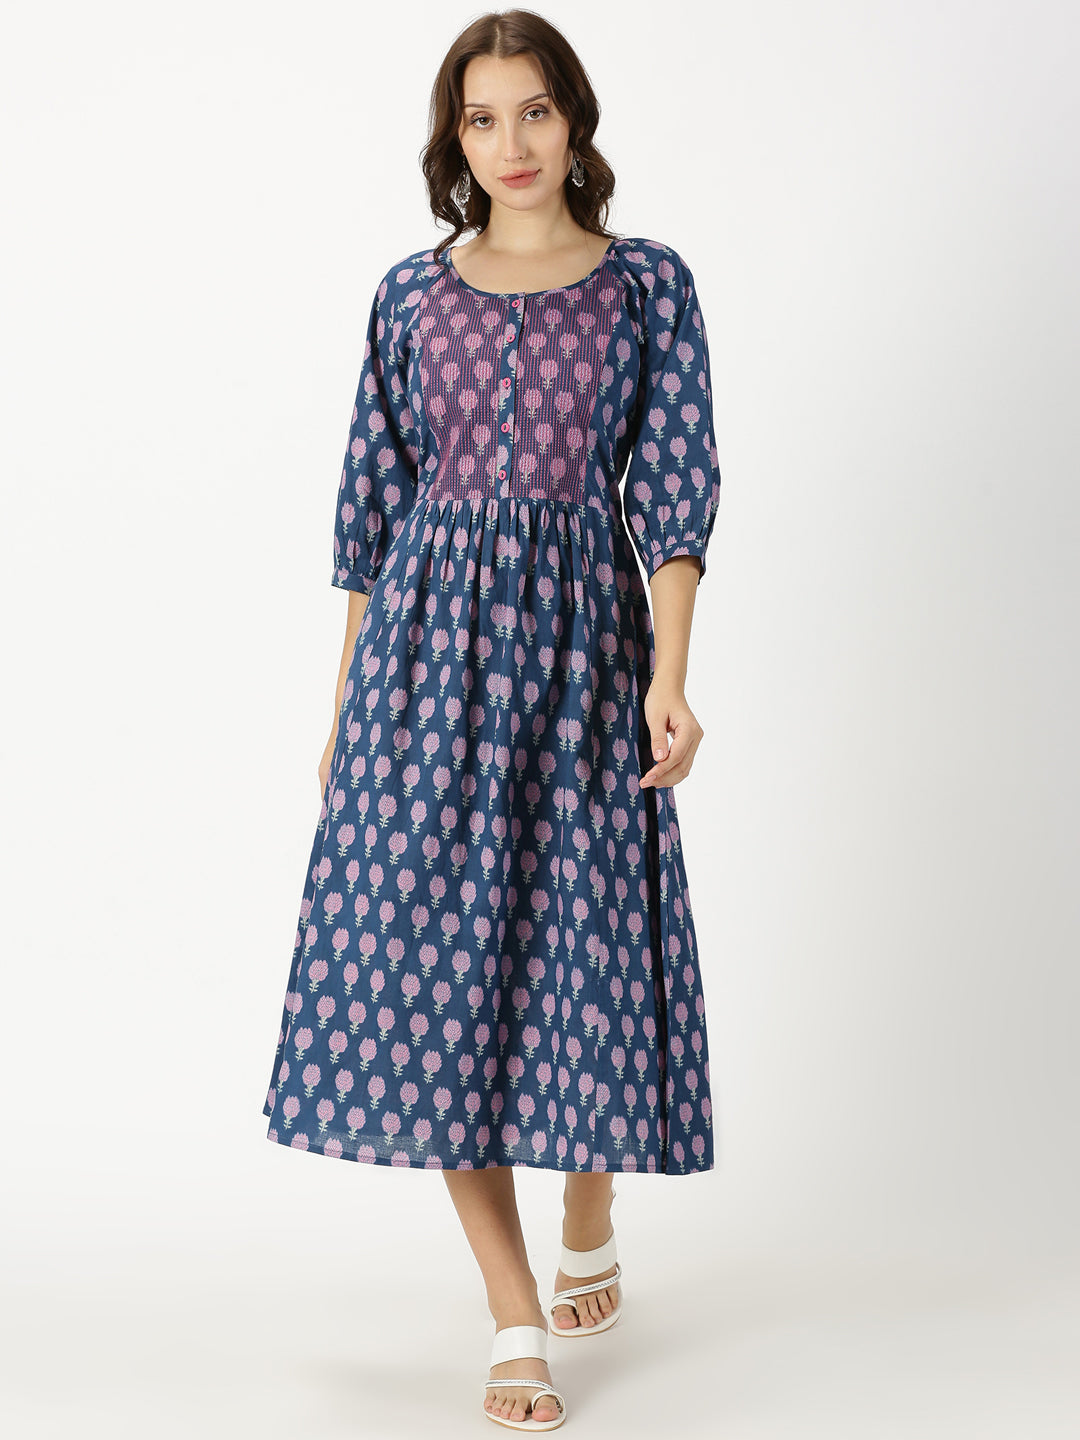 Blue Floral Print Midi Dress with Yoke Embroidery